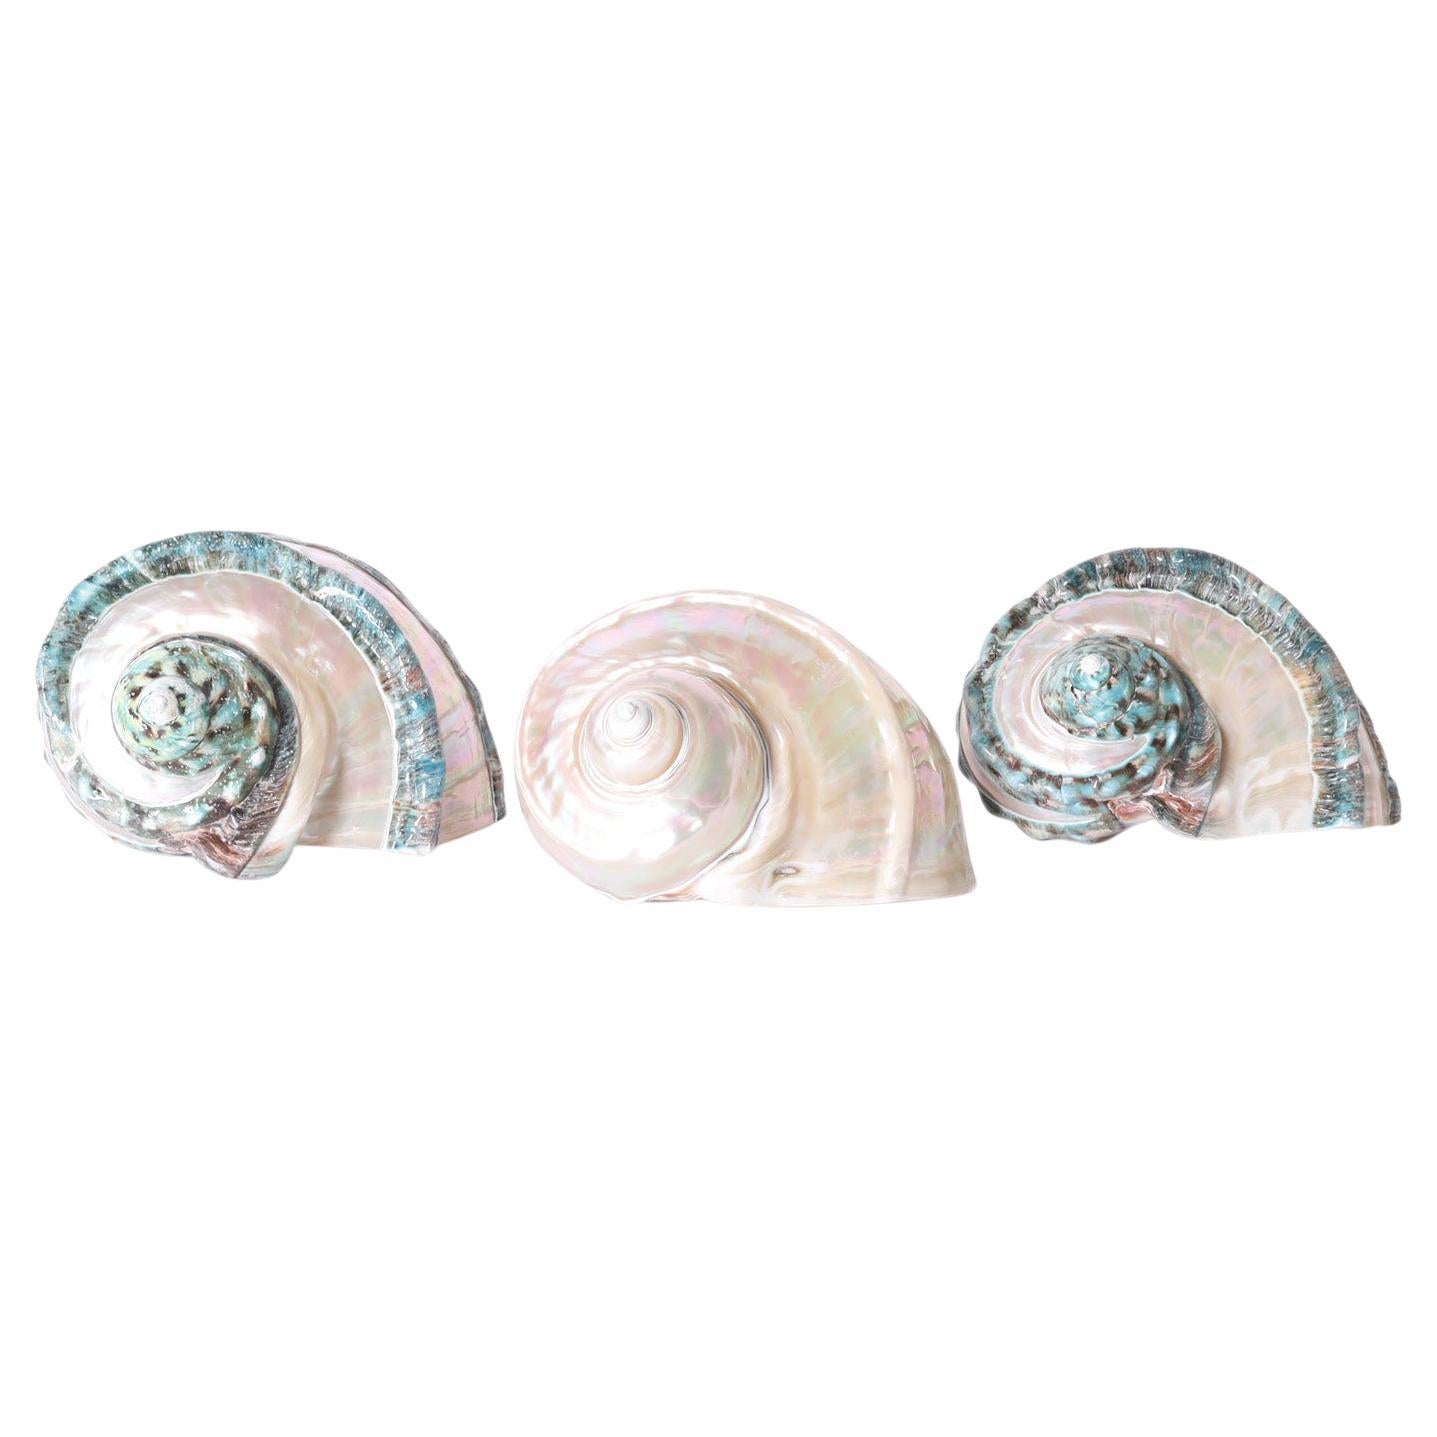 Giant Banded Turbo Shells, Priced Individually